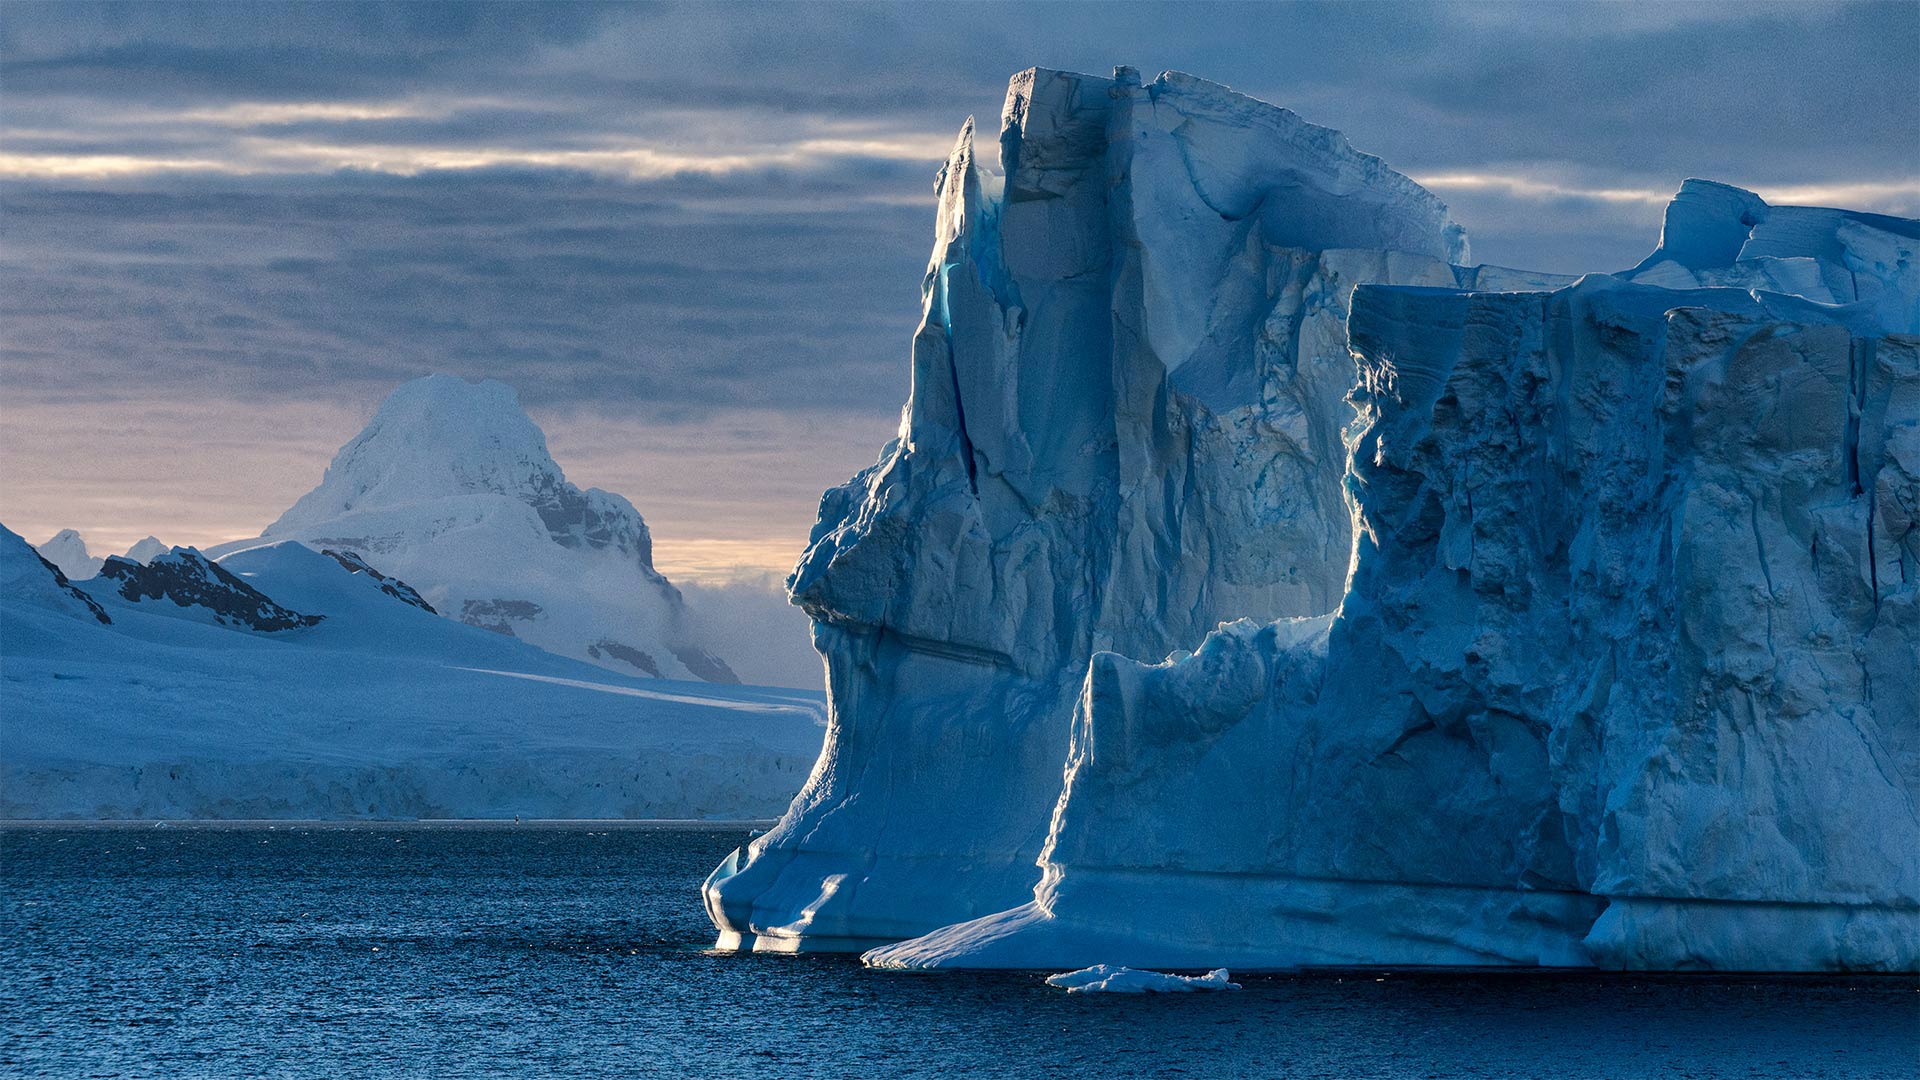 Blue icebergs near Cuverville Island, Antarctica - Mike Hill/Getty Images)